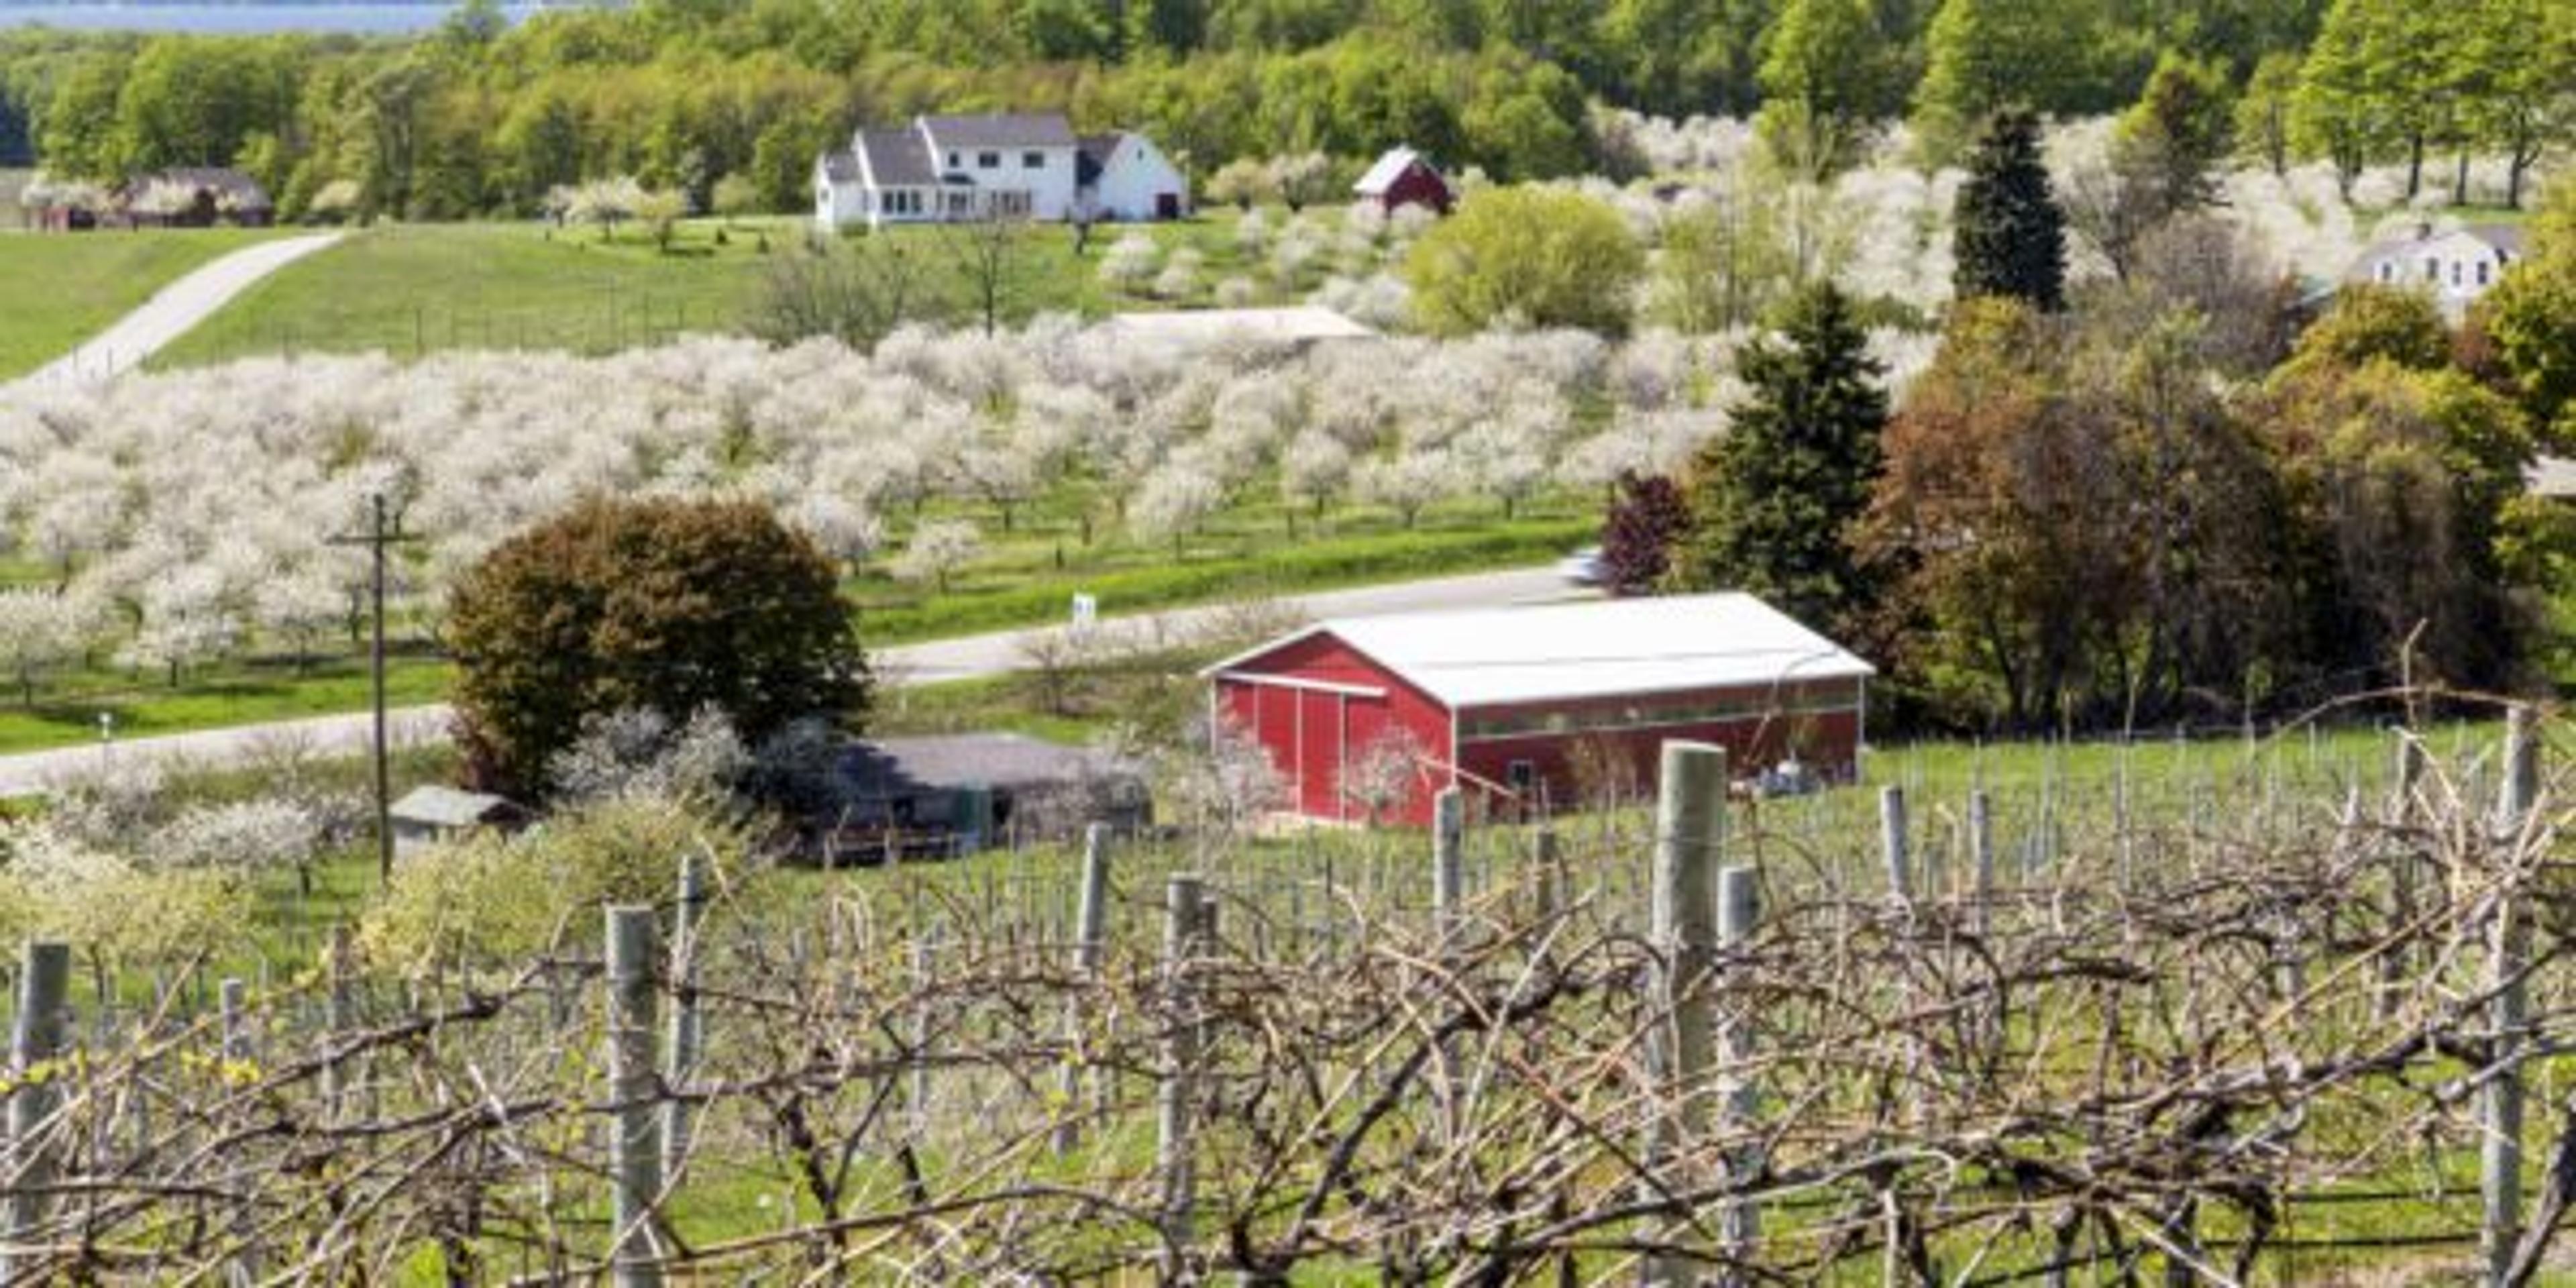 2023 AWESOME Guide to Traverse City Cherry Blossoms